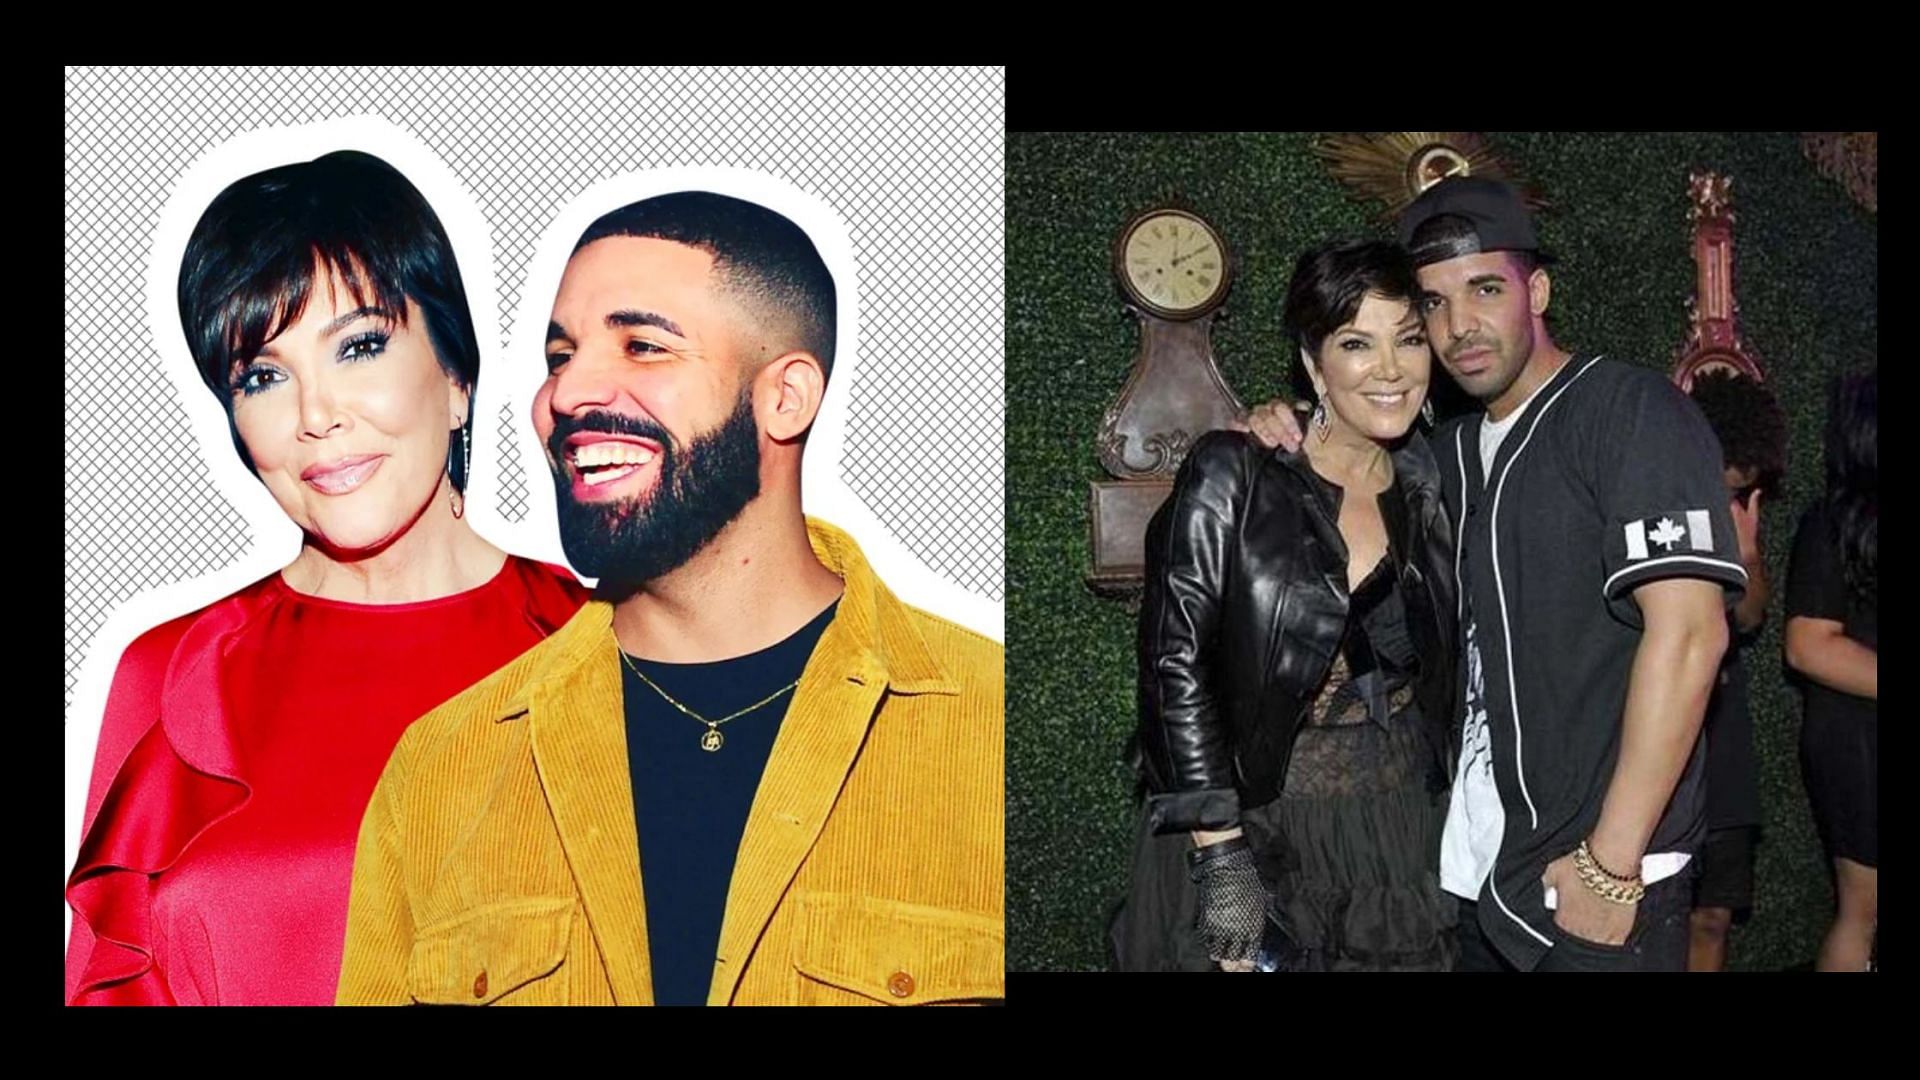 Drake and Kris Jenner rumored to have a relationship (Image via Twitter)